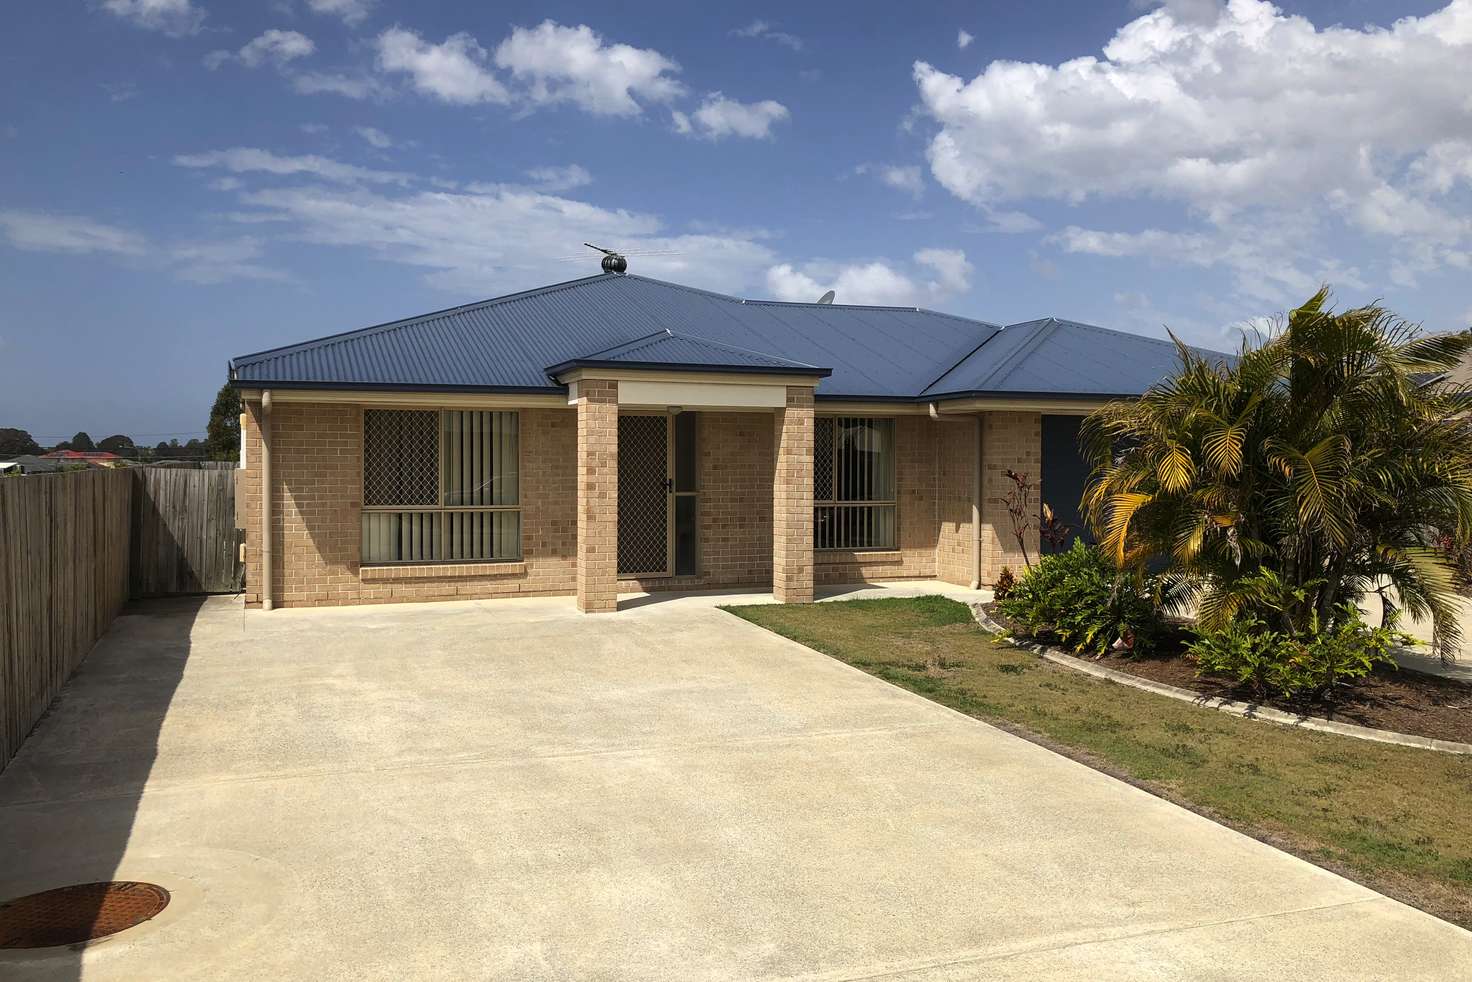 Main view of Homely house listing, 5 Hazelnut St, Loganlea QLD 4131